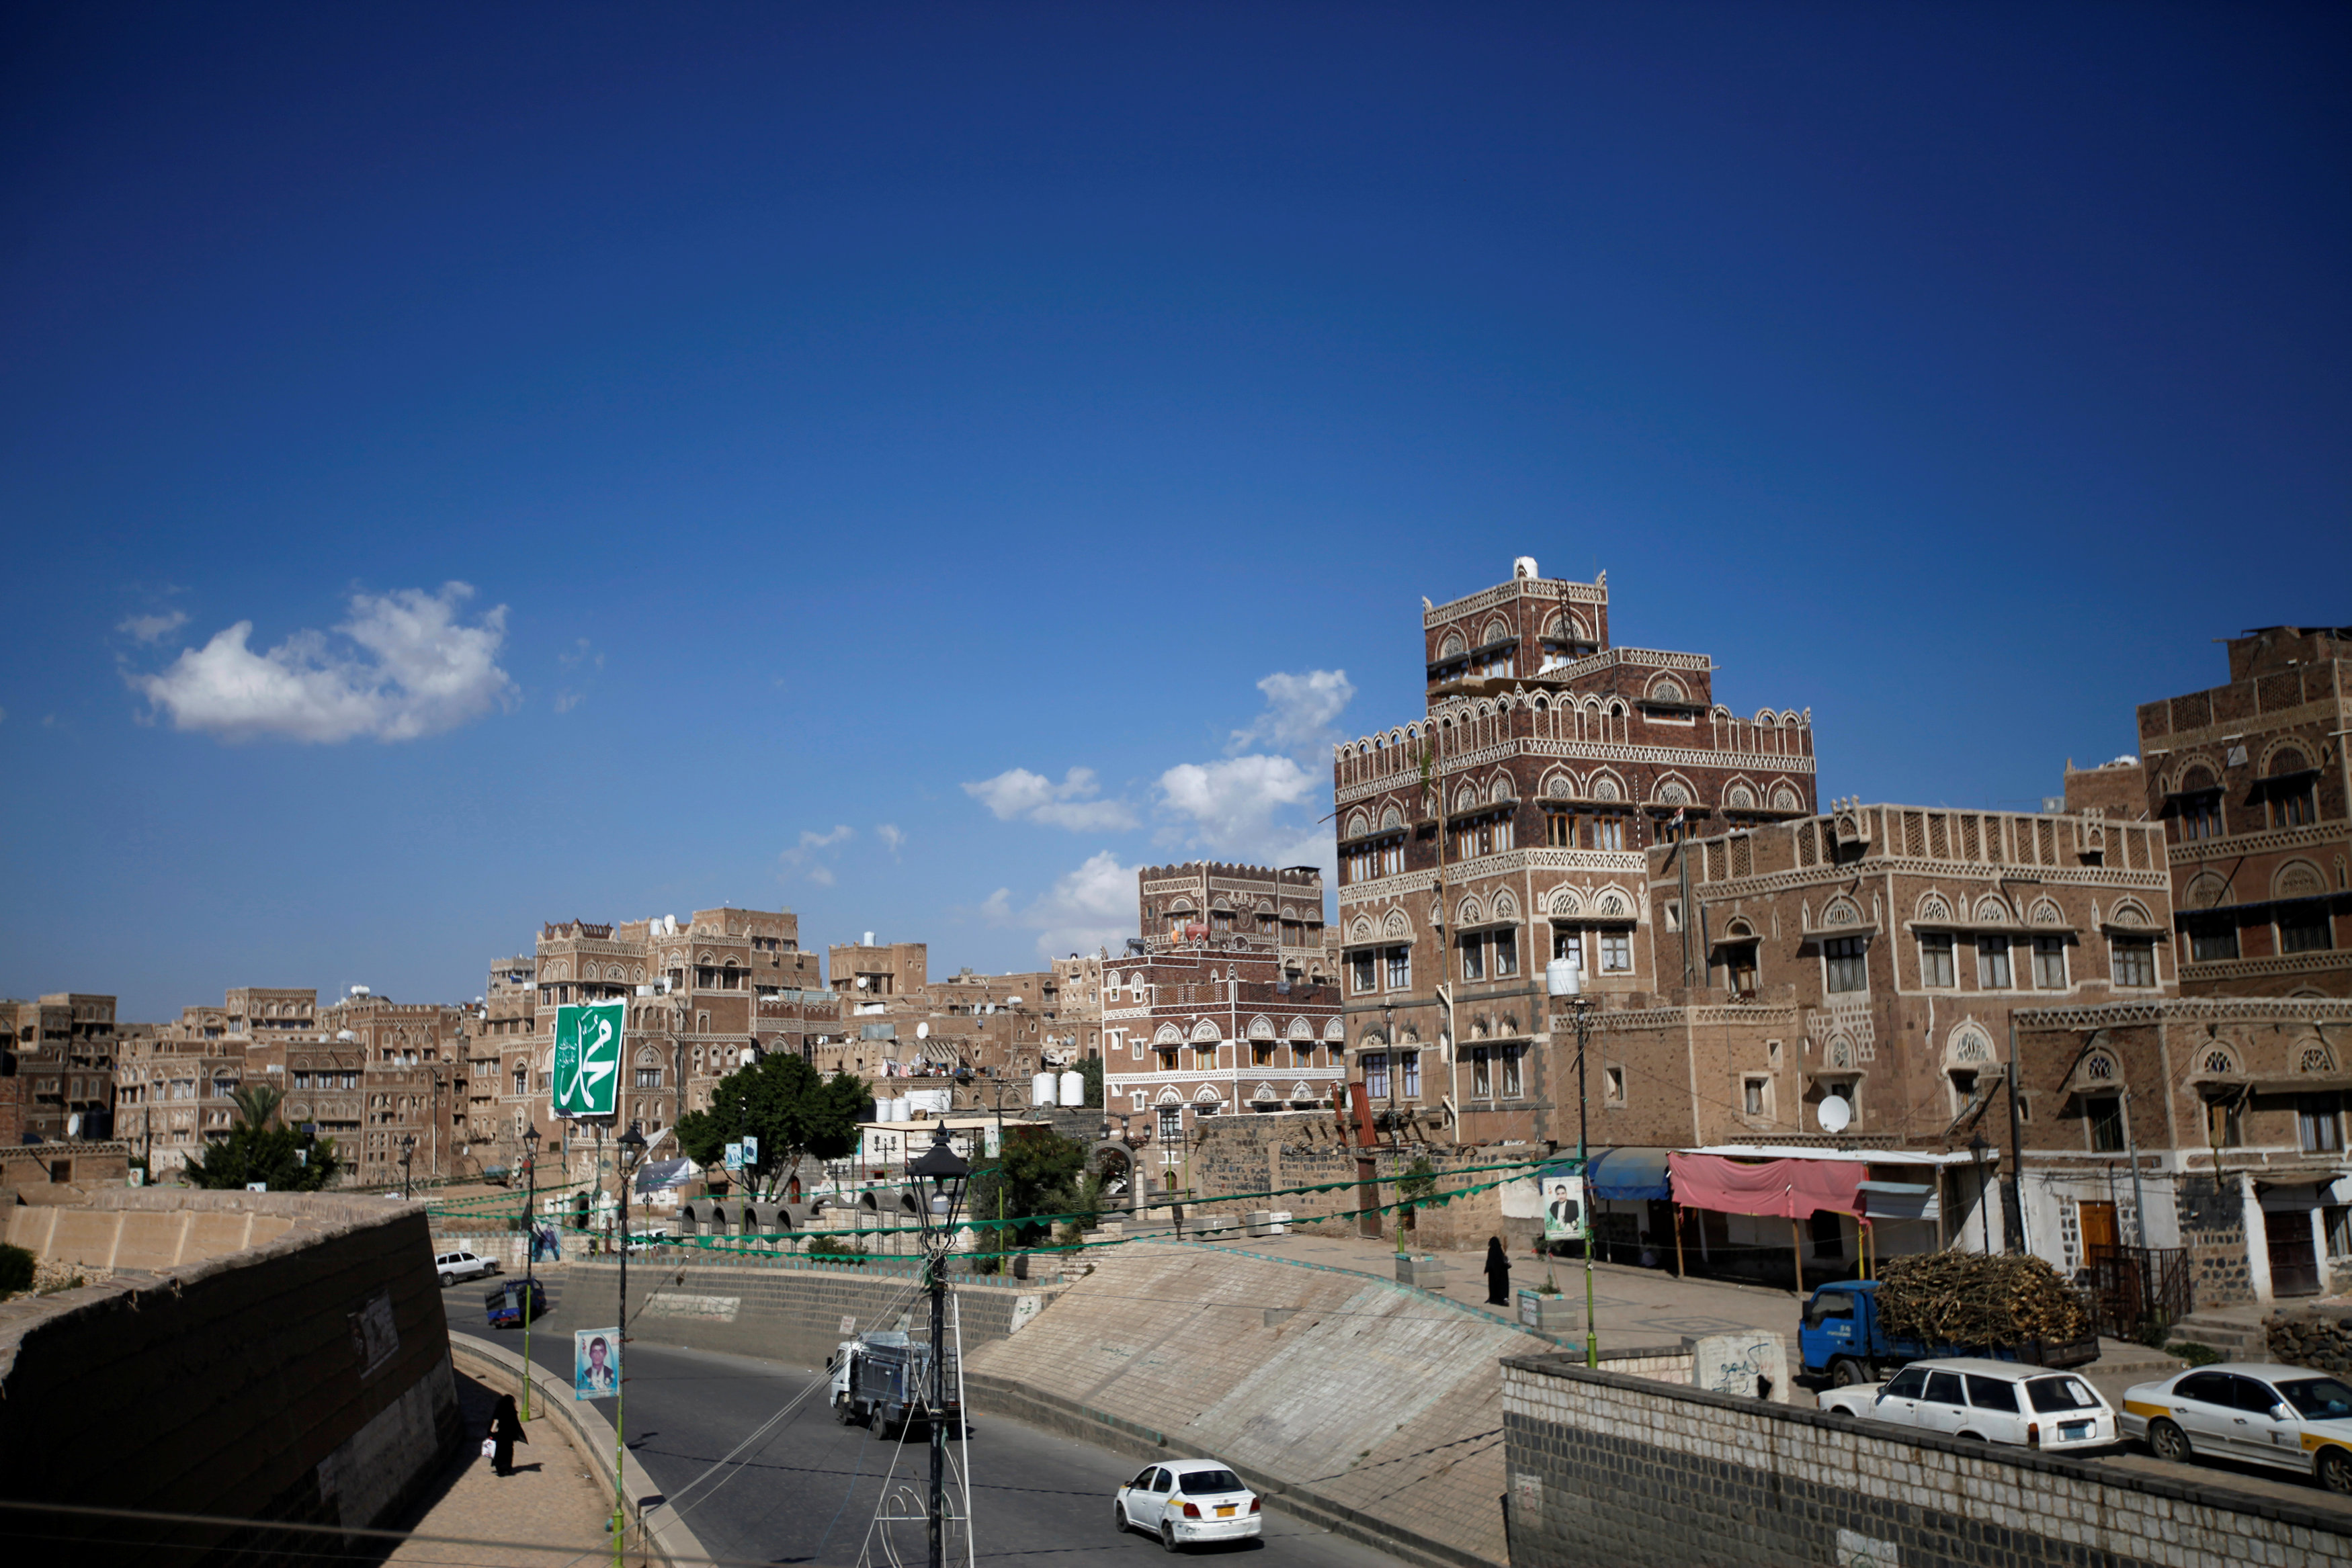 A general view of the old city of Sanaa